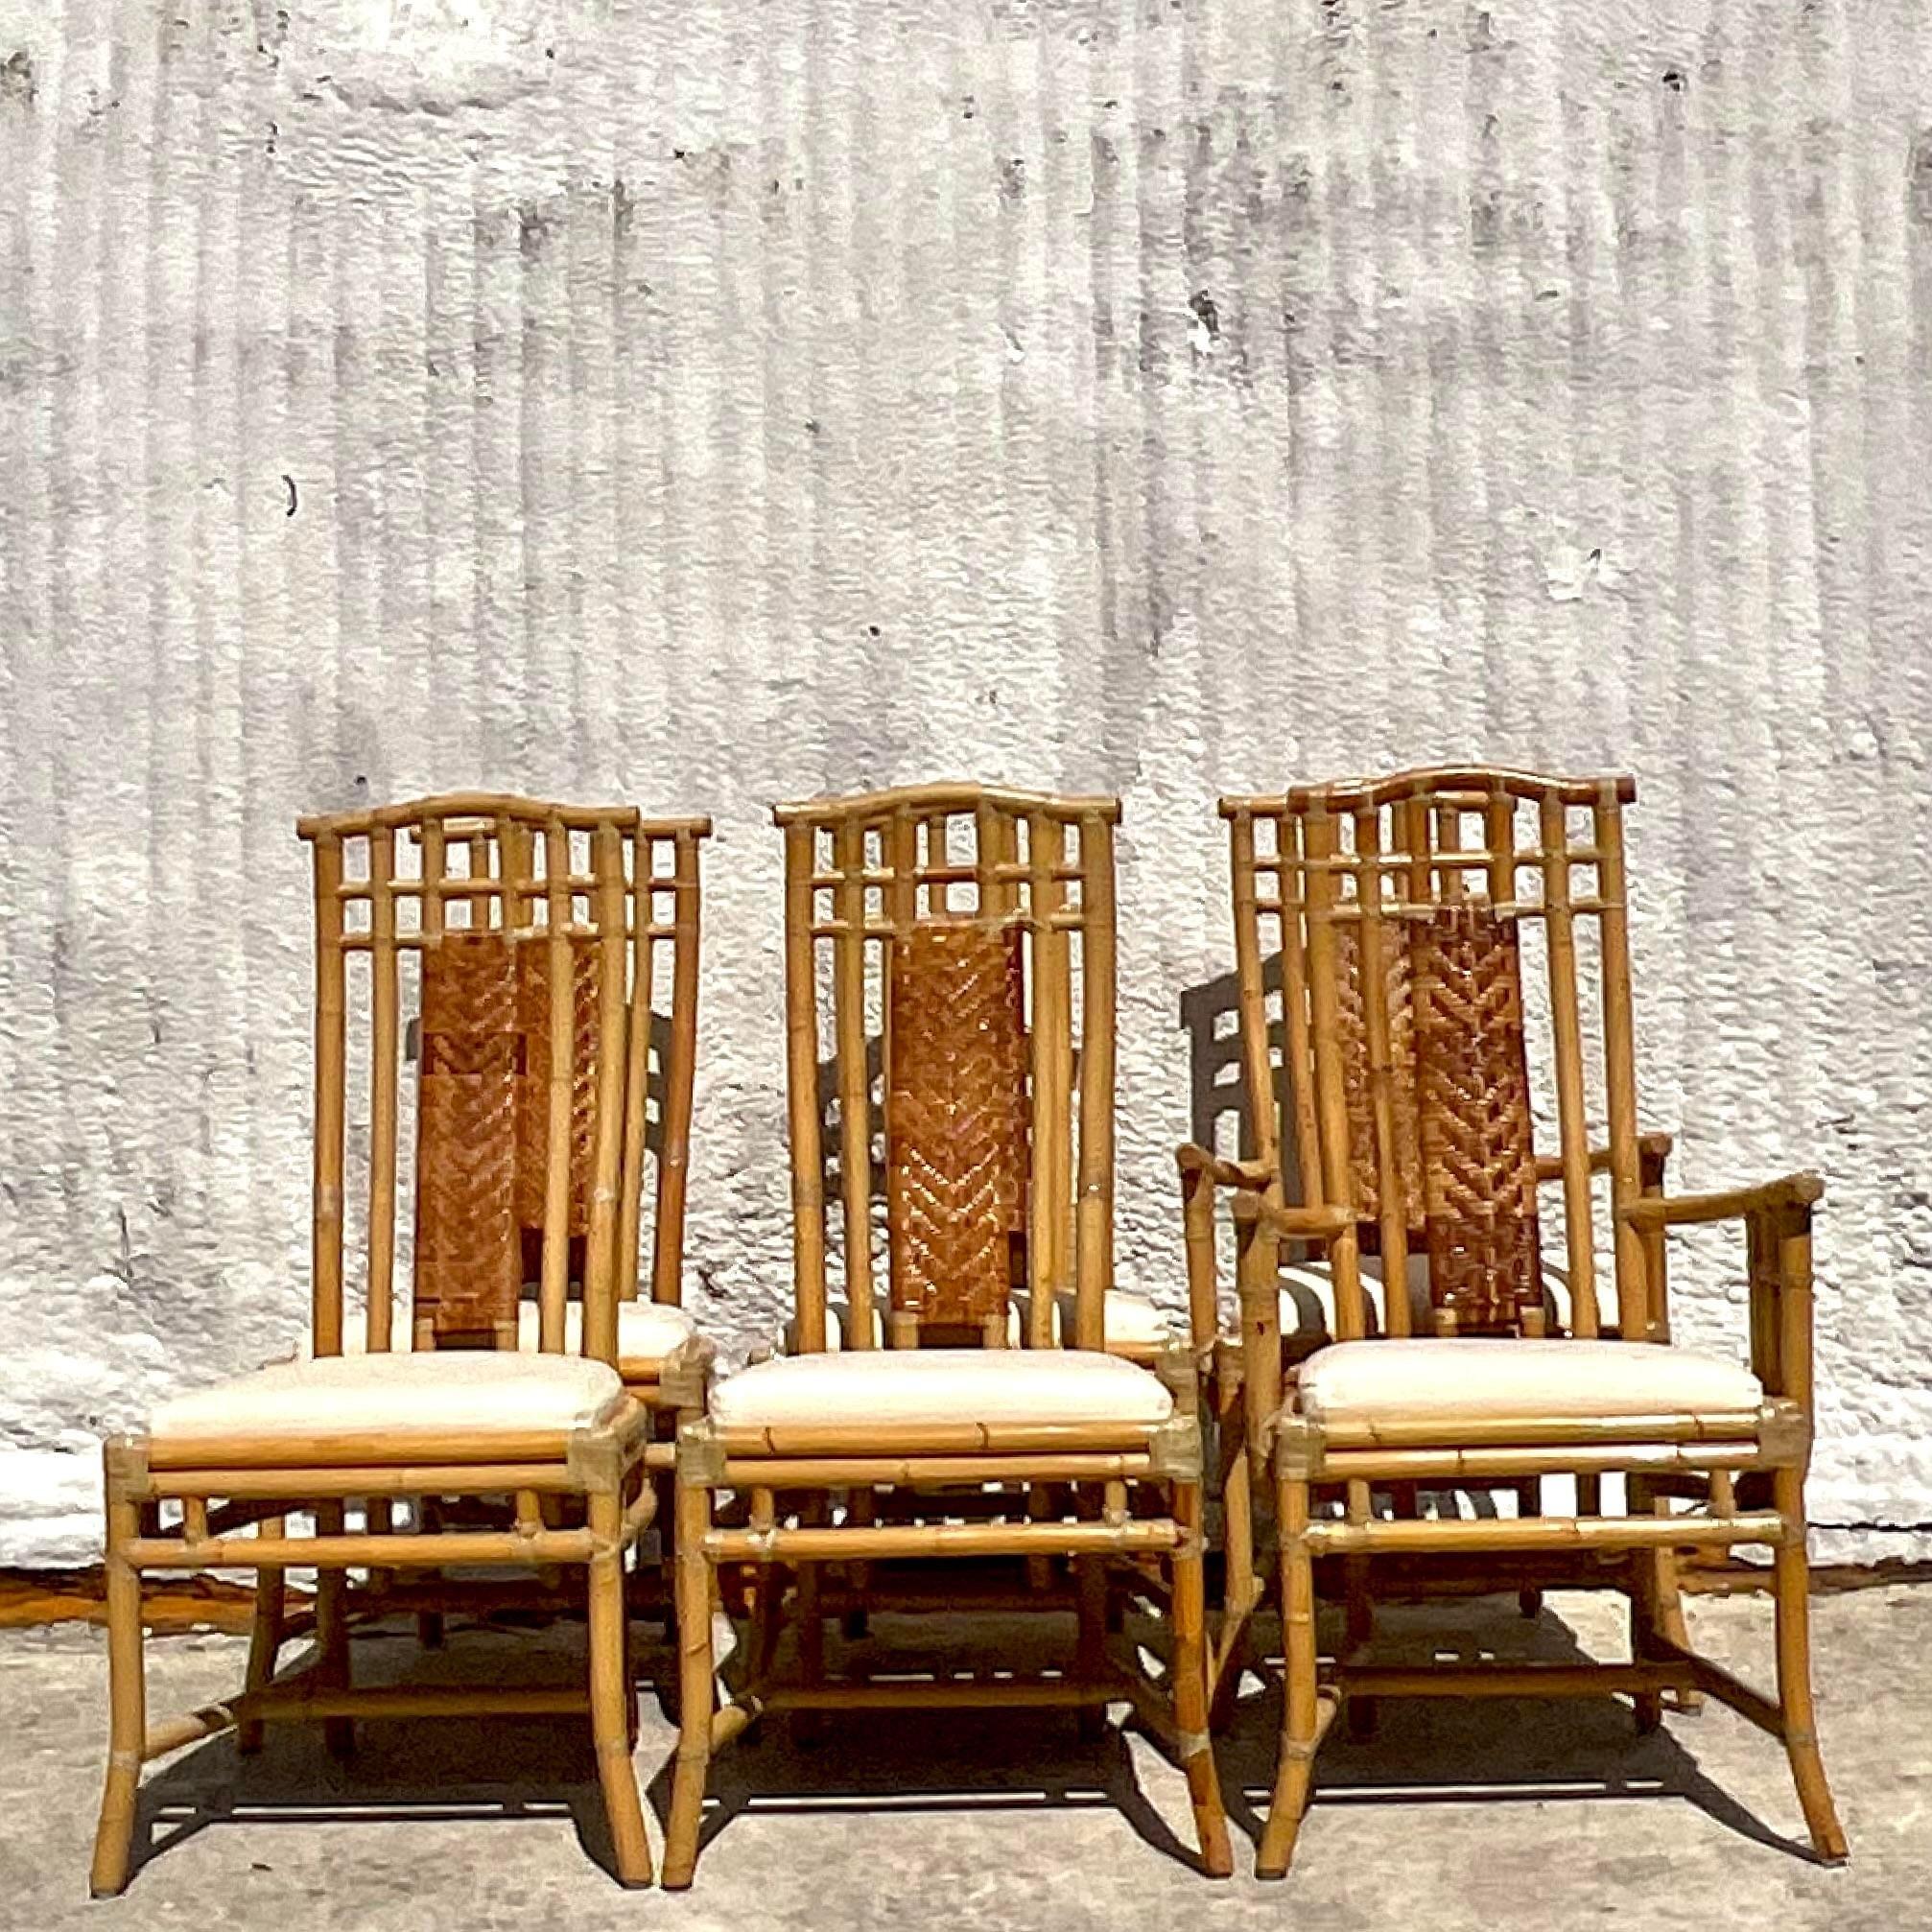 Upholstery Vintage Coastal High Back Woven Rattan Chairs - Set of 6 For Sale